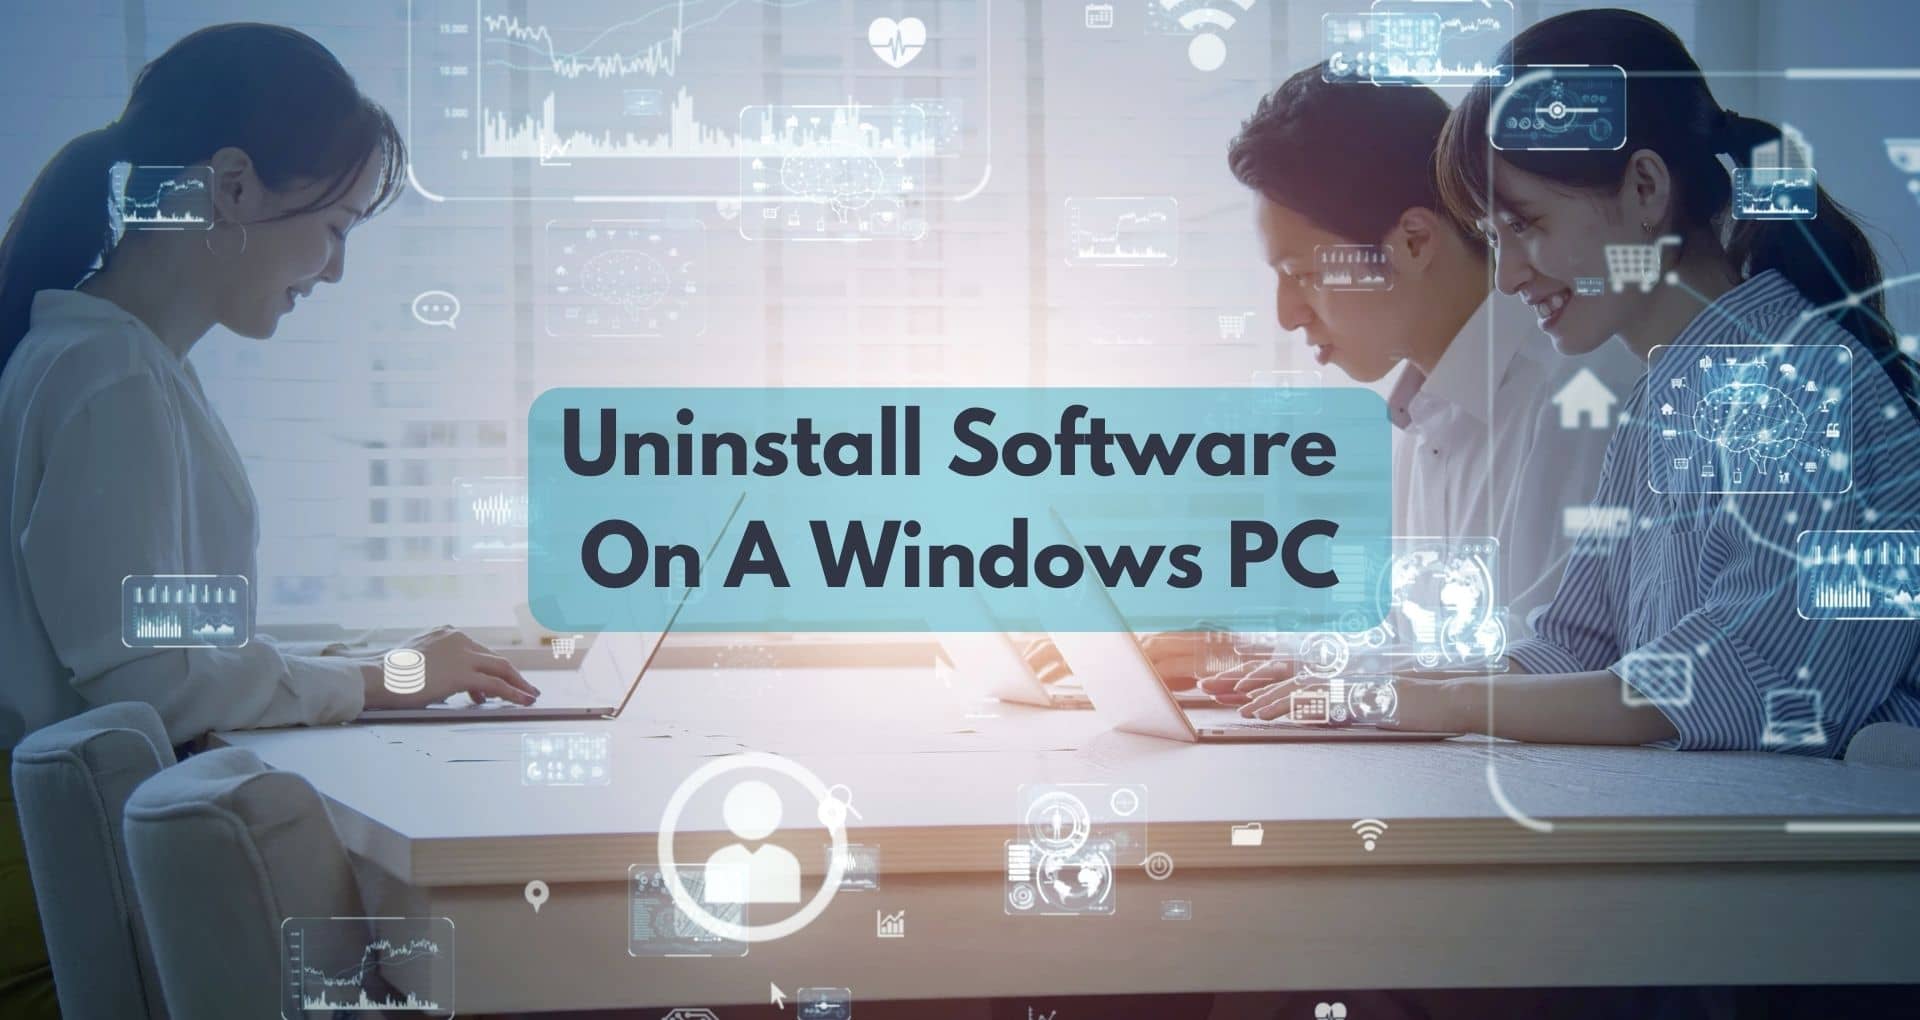 How To Uninstall Software On A Windows PC?